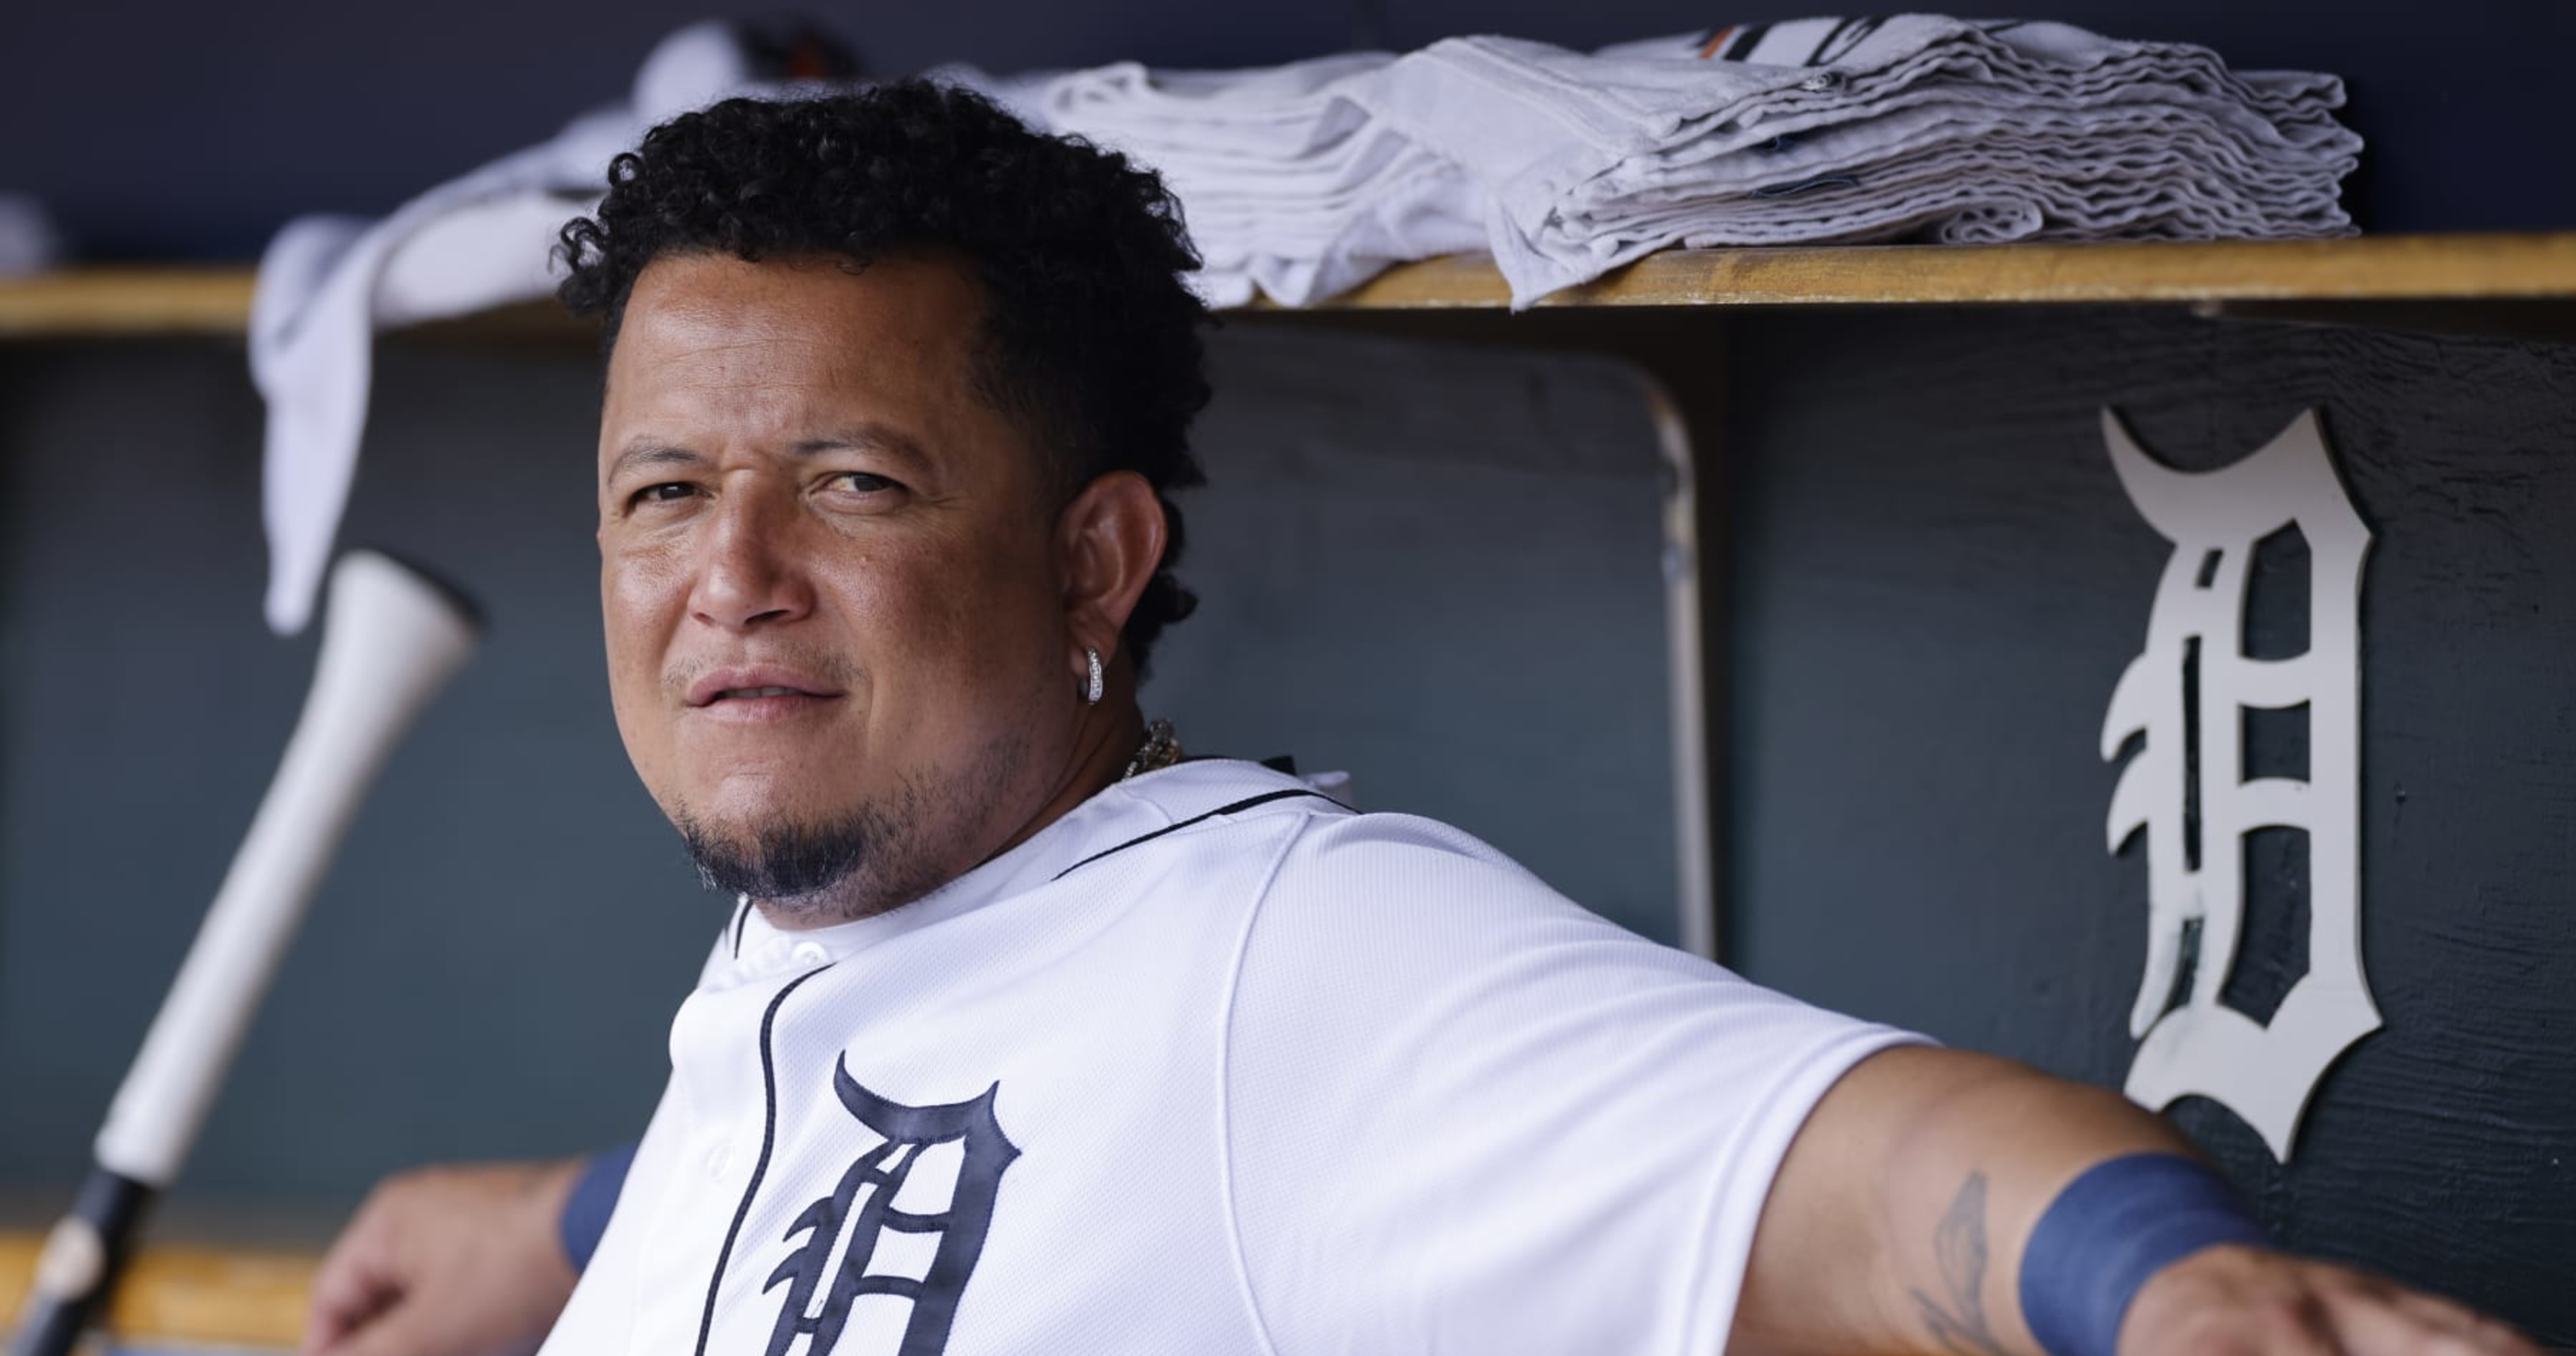 The end of an era. The kids today will never understand how dominant of an  athlete Miguel Cabrera was during his days as a Marlin/Tiger…